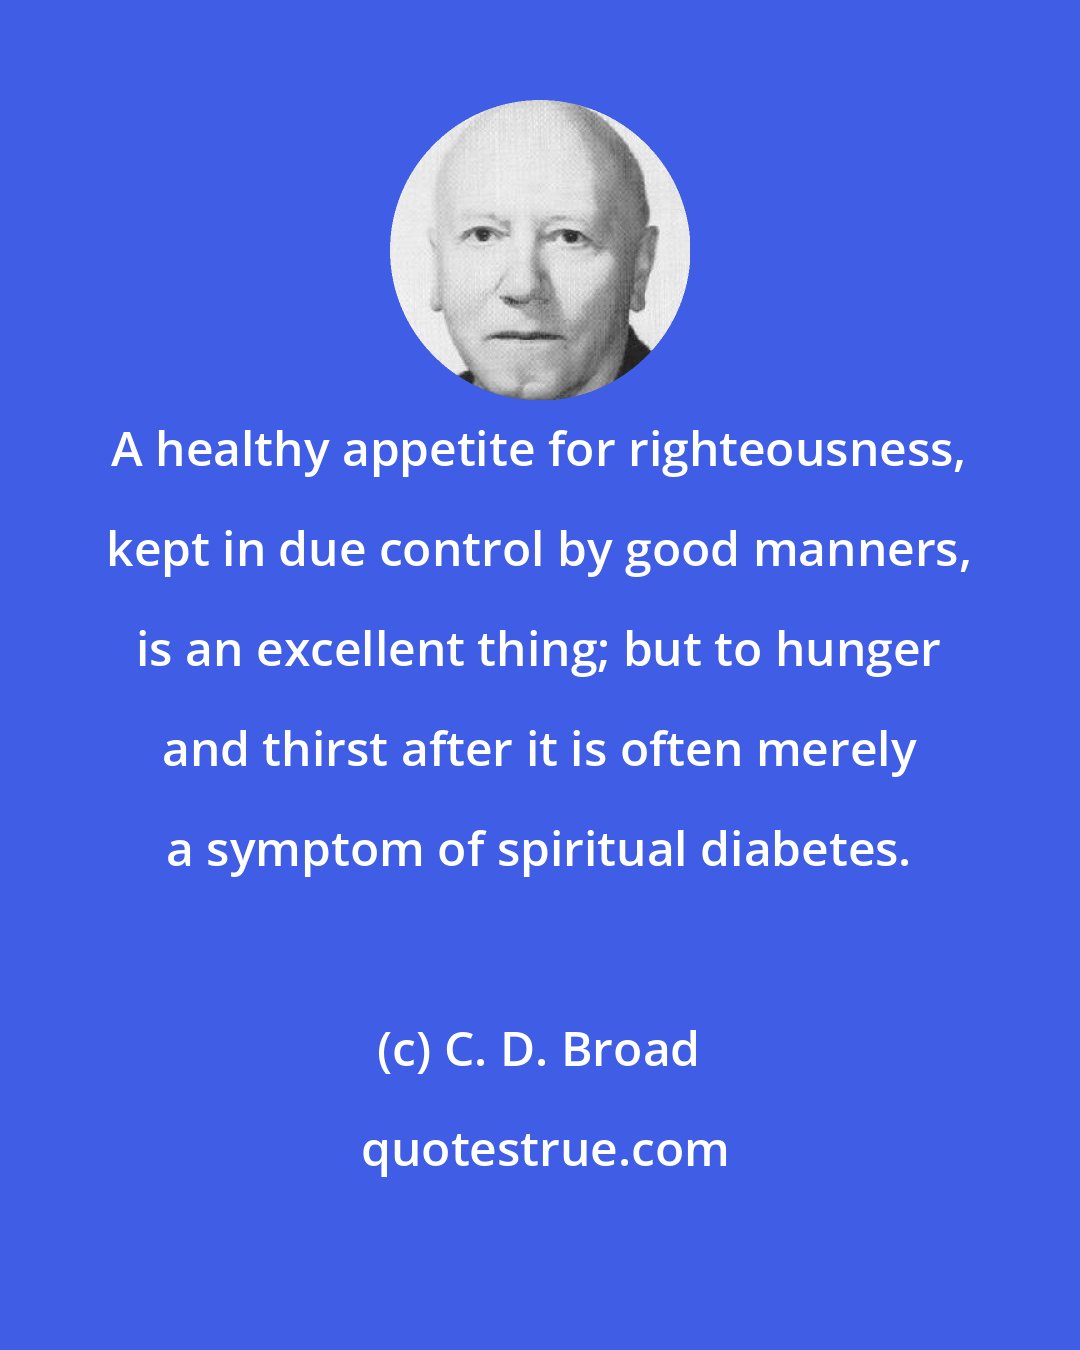 C. D. Broad: A healthy appetite for righteousness, kept in due control by good manners, is an excellent thing; but to hunger and thirst after it is often merely a symptom of spiritual diabetes.